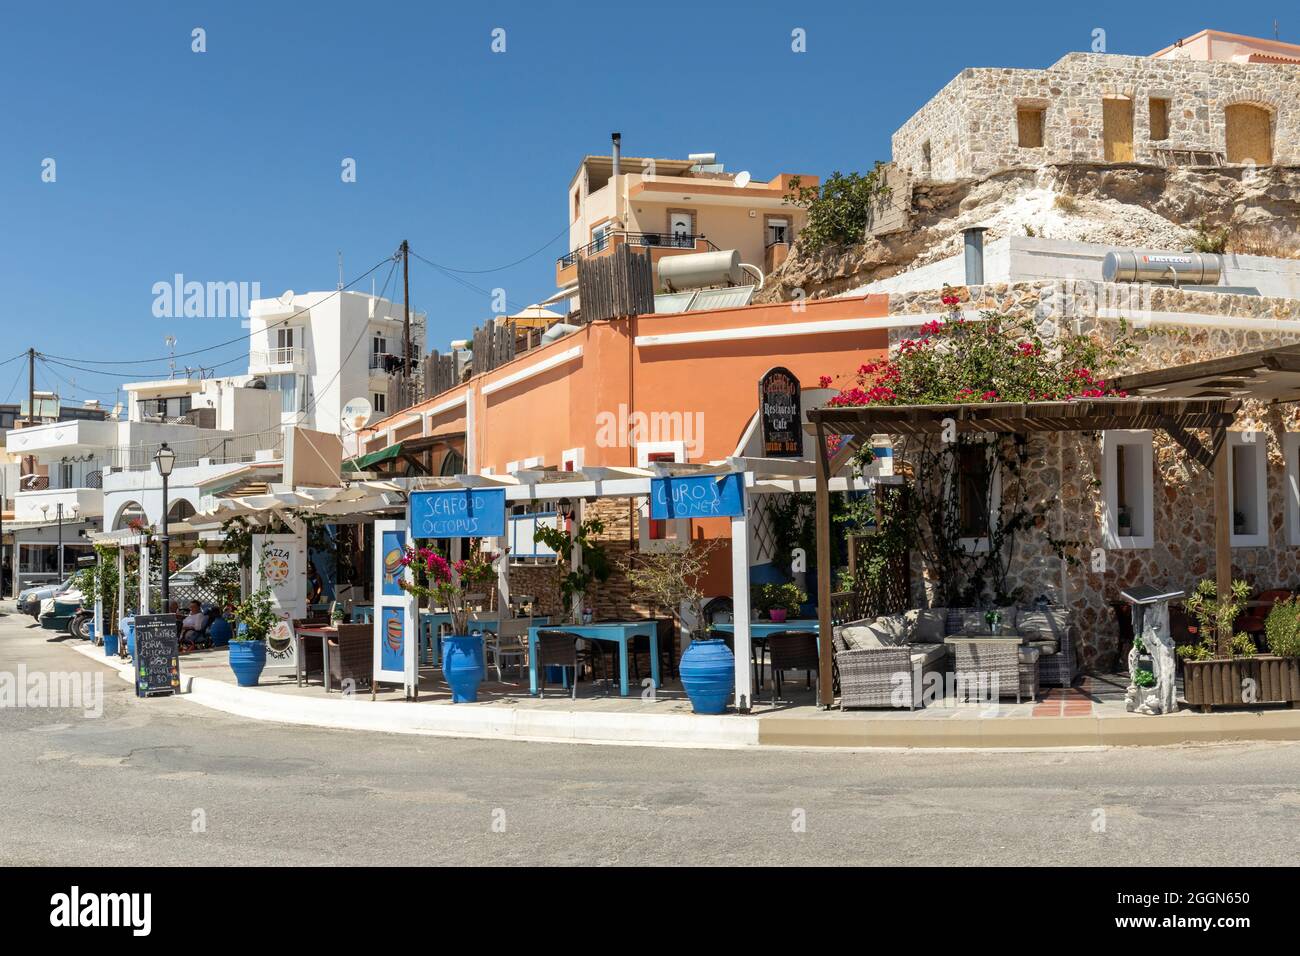 The bars and restaurants in Kefalos village without tourists due to Covid travel restrictions, Island of Kos, Greece Stock Photo